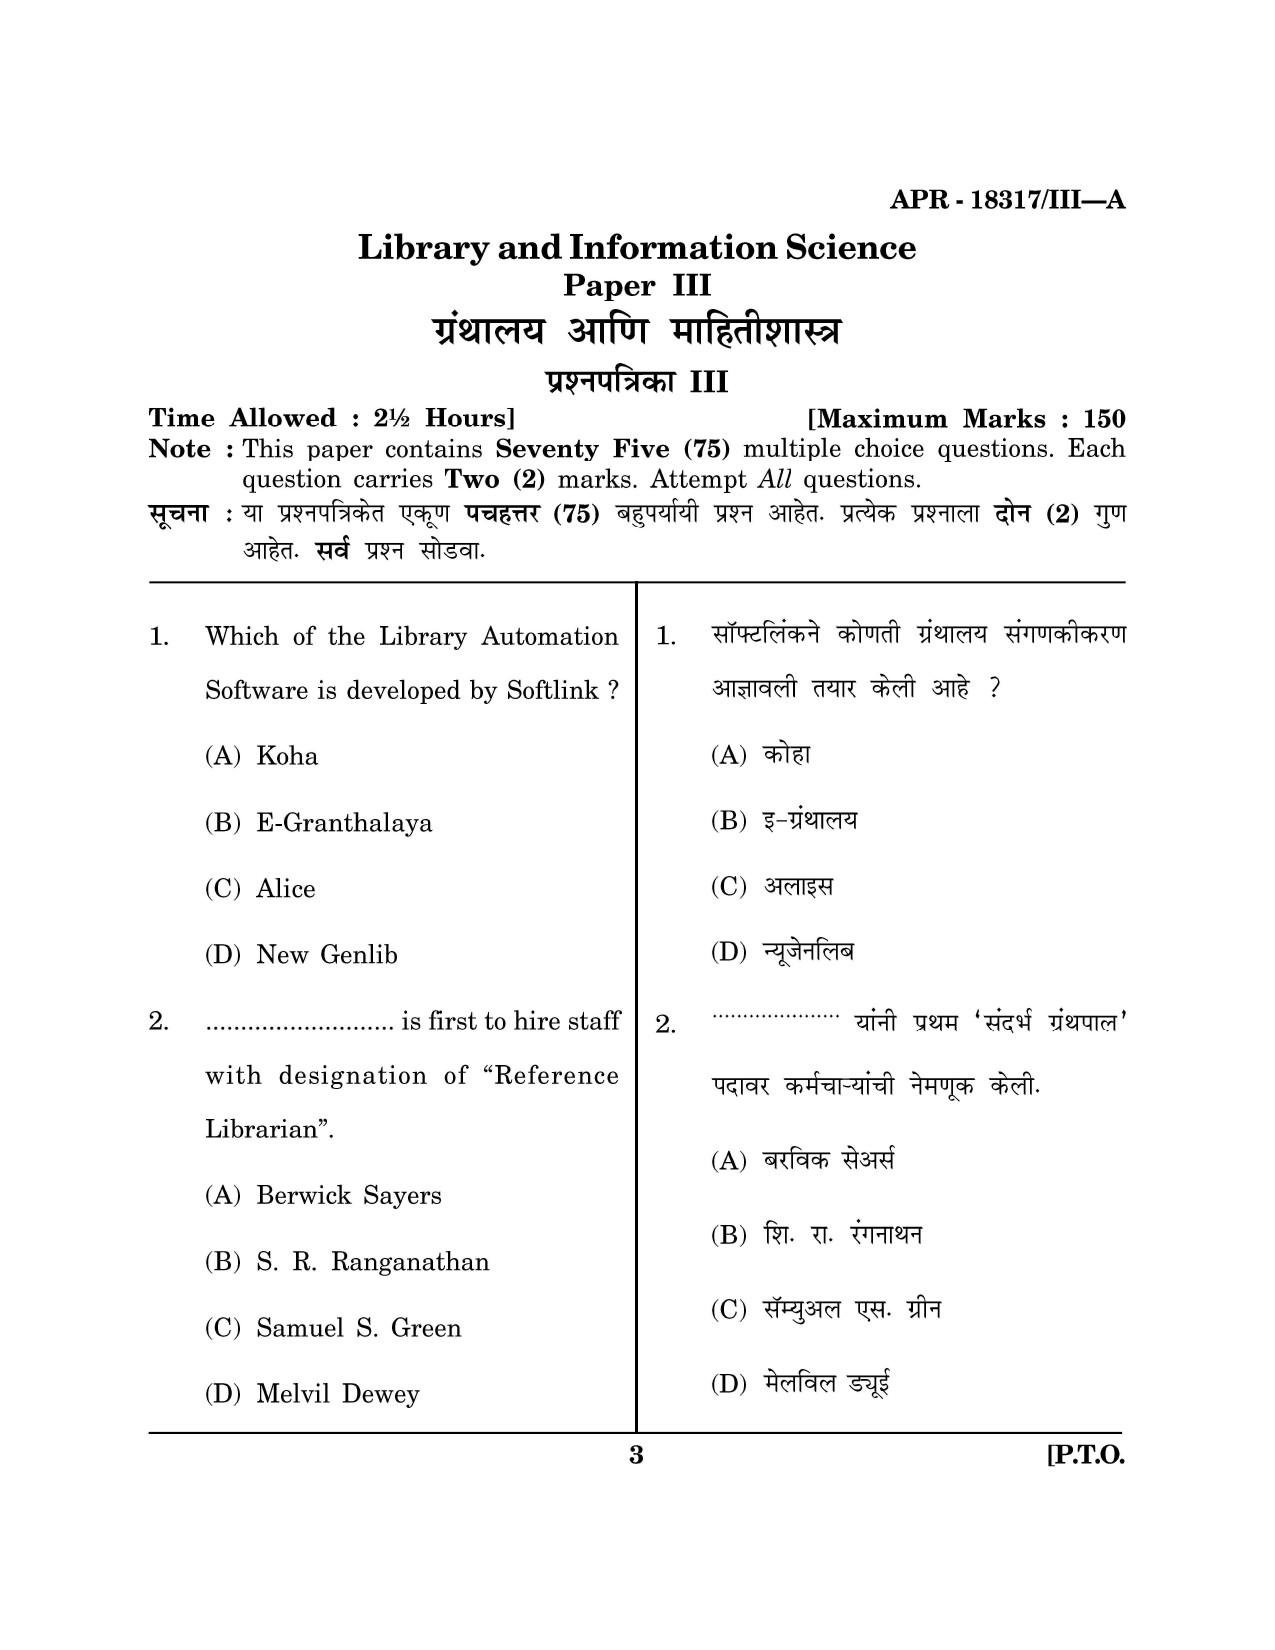 Maharashtra SET Library Information Science Question Paper III April 2017 2